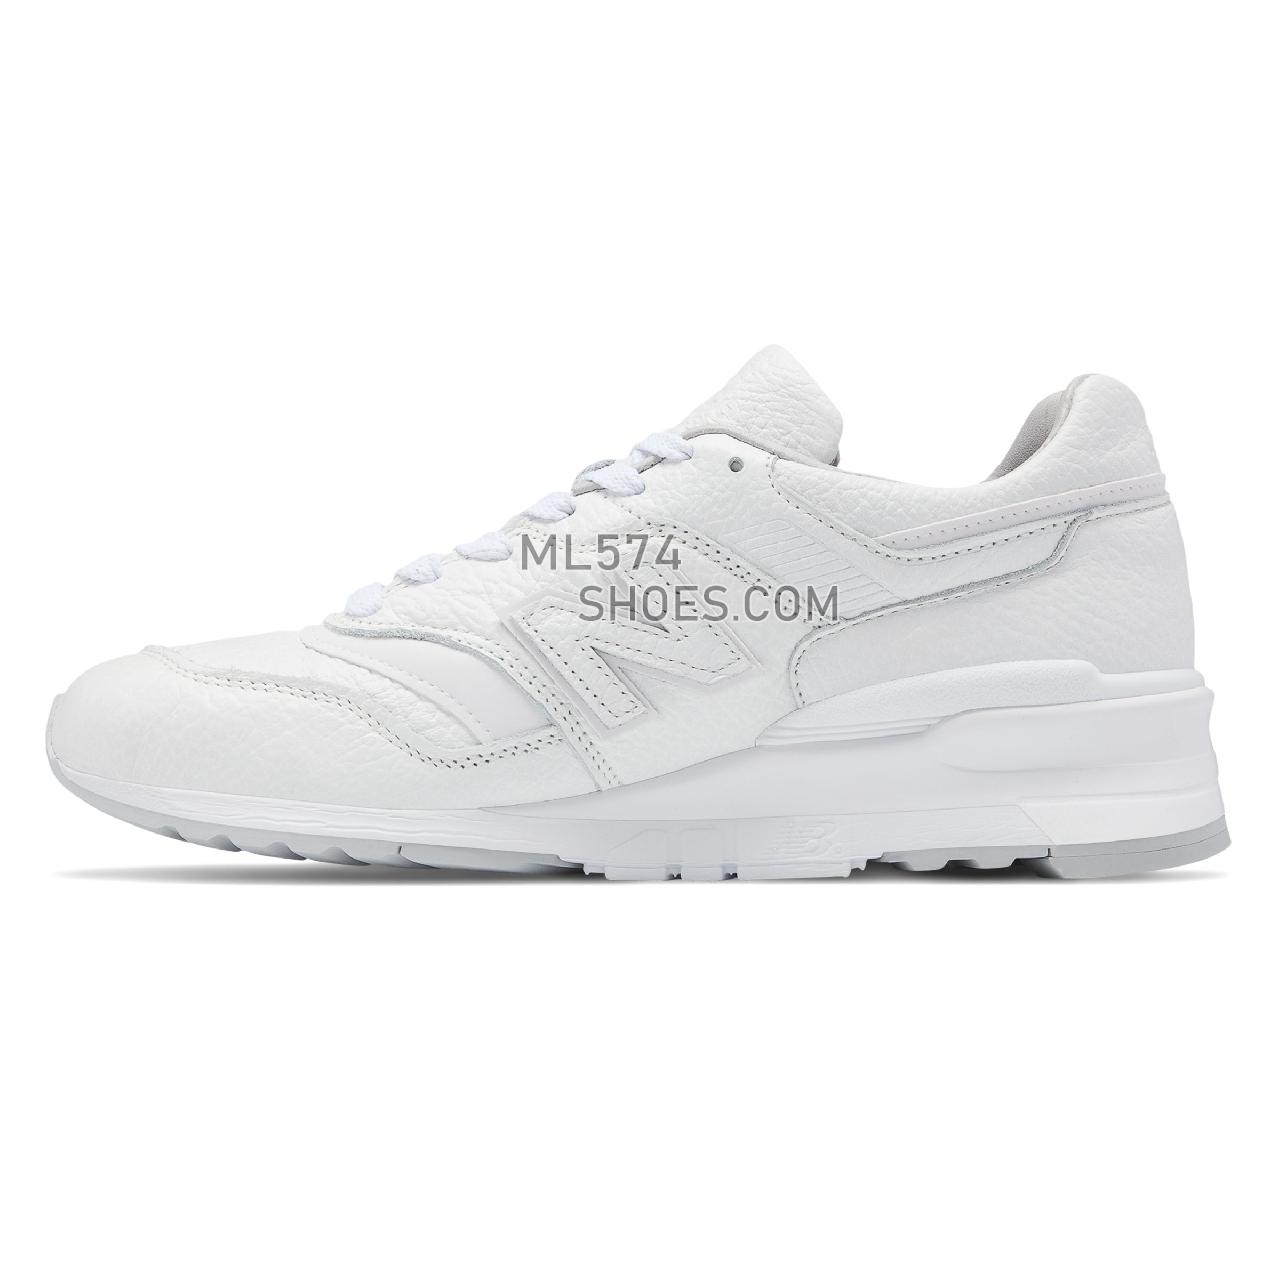 New Balance Made in US 997 Bison - Men's 997 Made in US Classic M997-LH - White with Grey - M997BSN